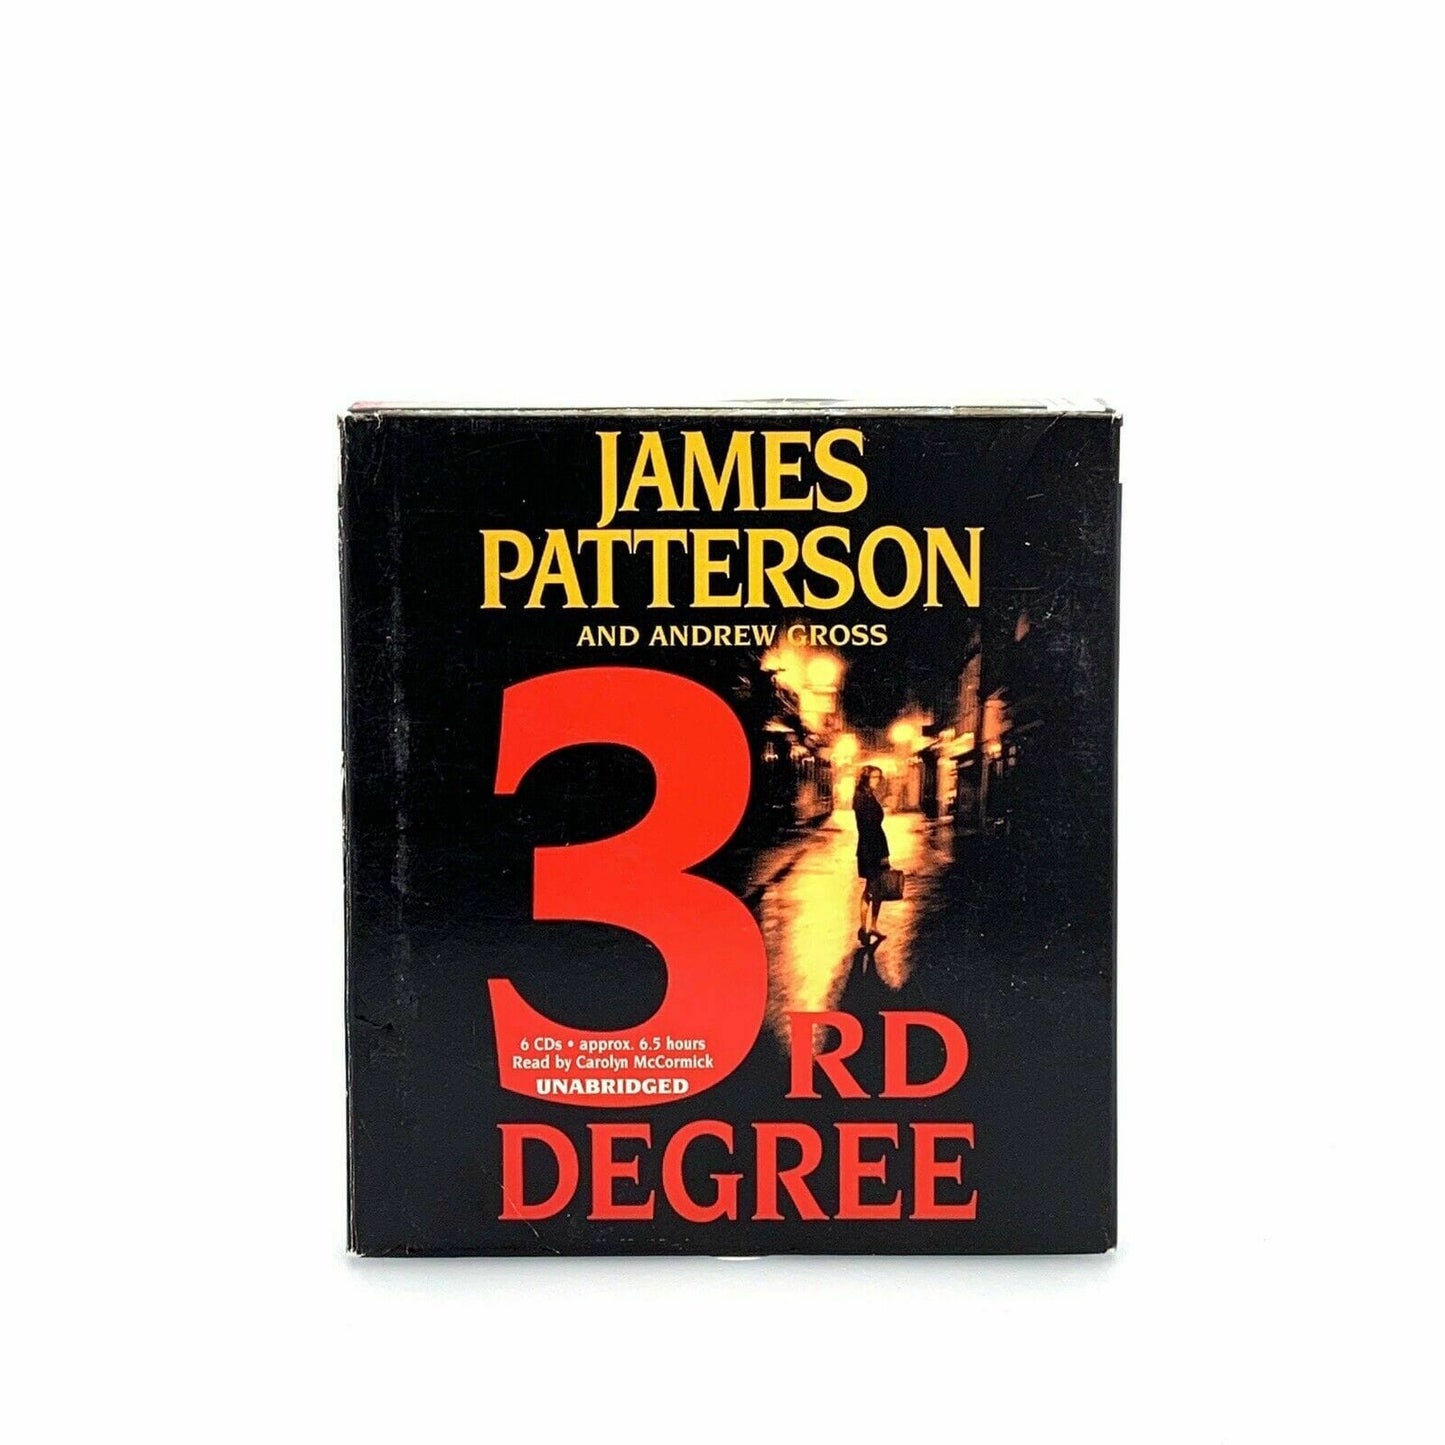 Women's Murder Club Ser.: 3rd Degree by Andrew Gross and James Patterson (2004,